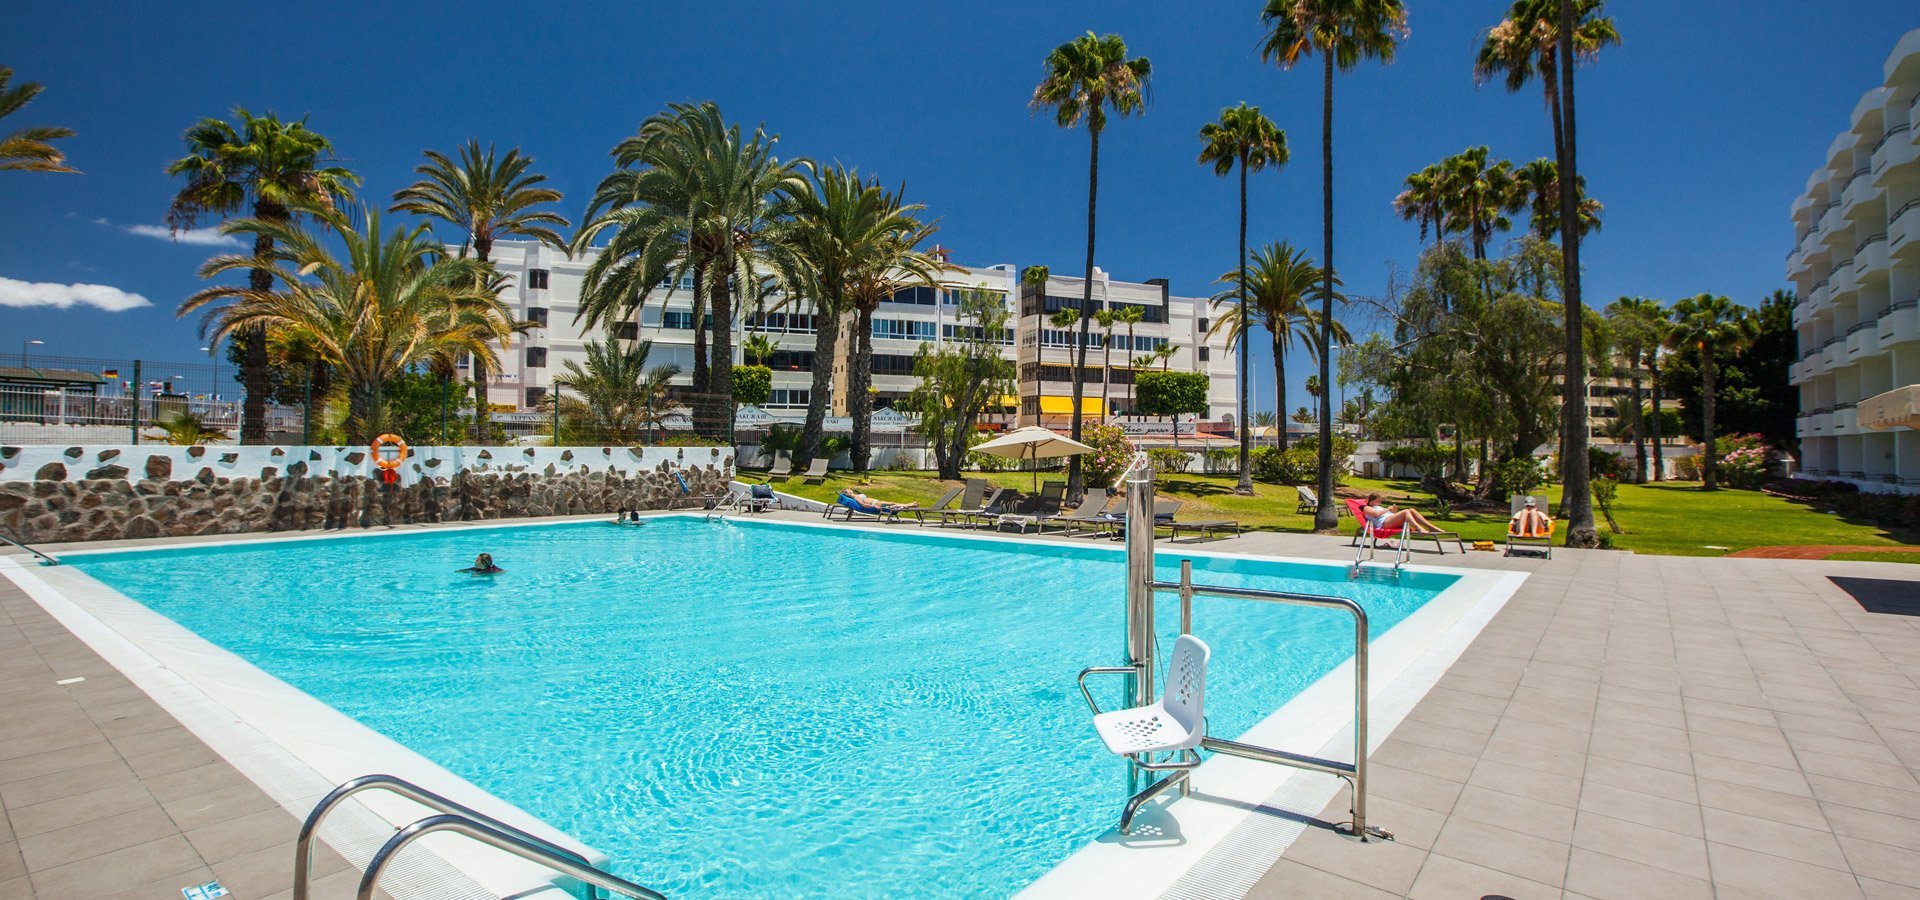 CHECK-IN ONLINE - Abora Catarina by Lopesan Hotels - Gran Canaria